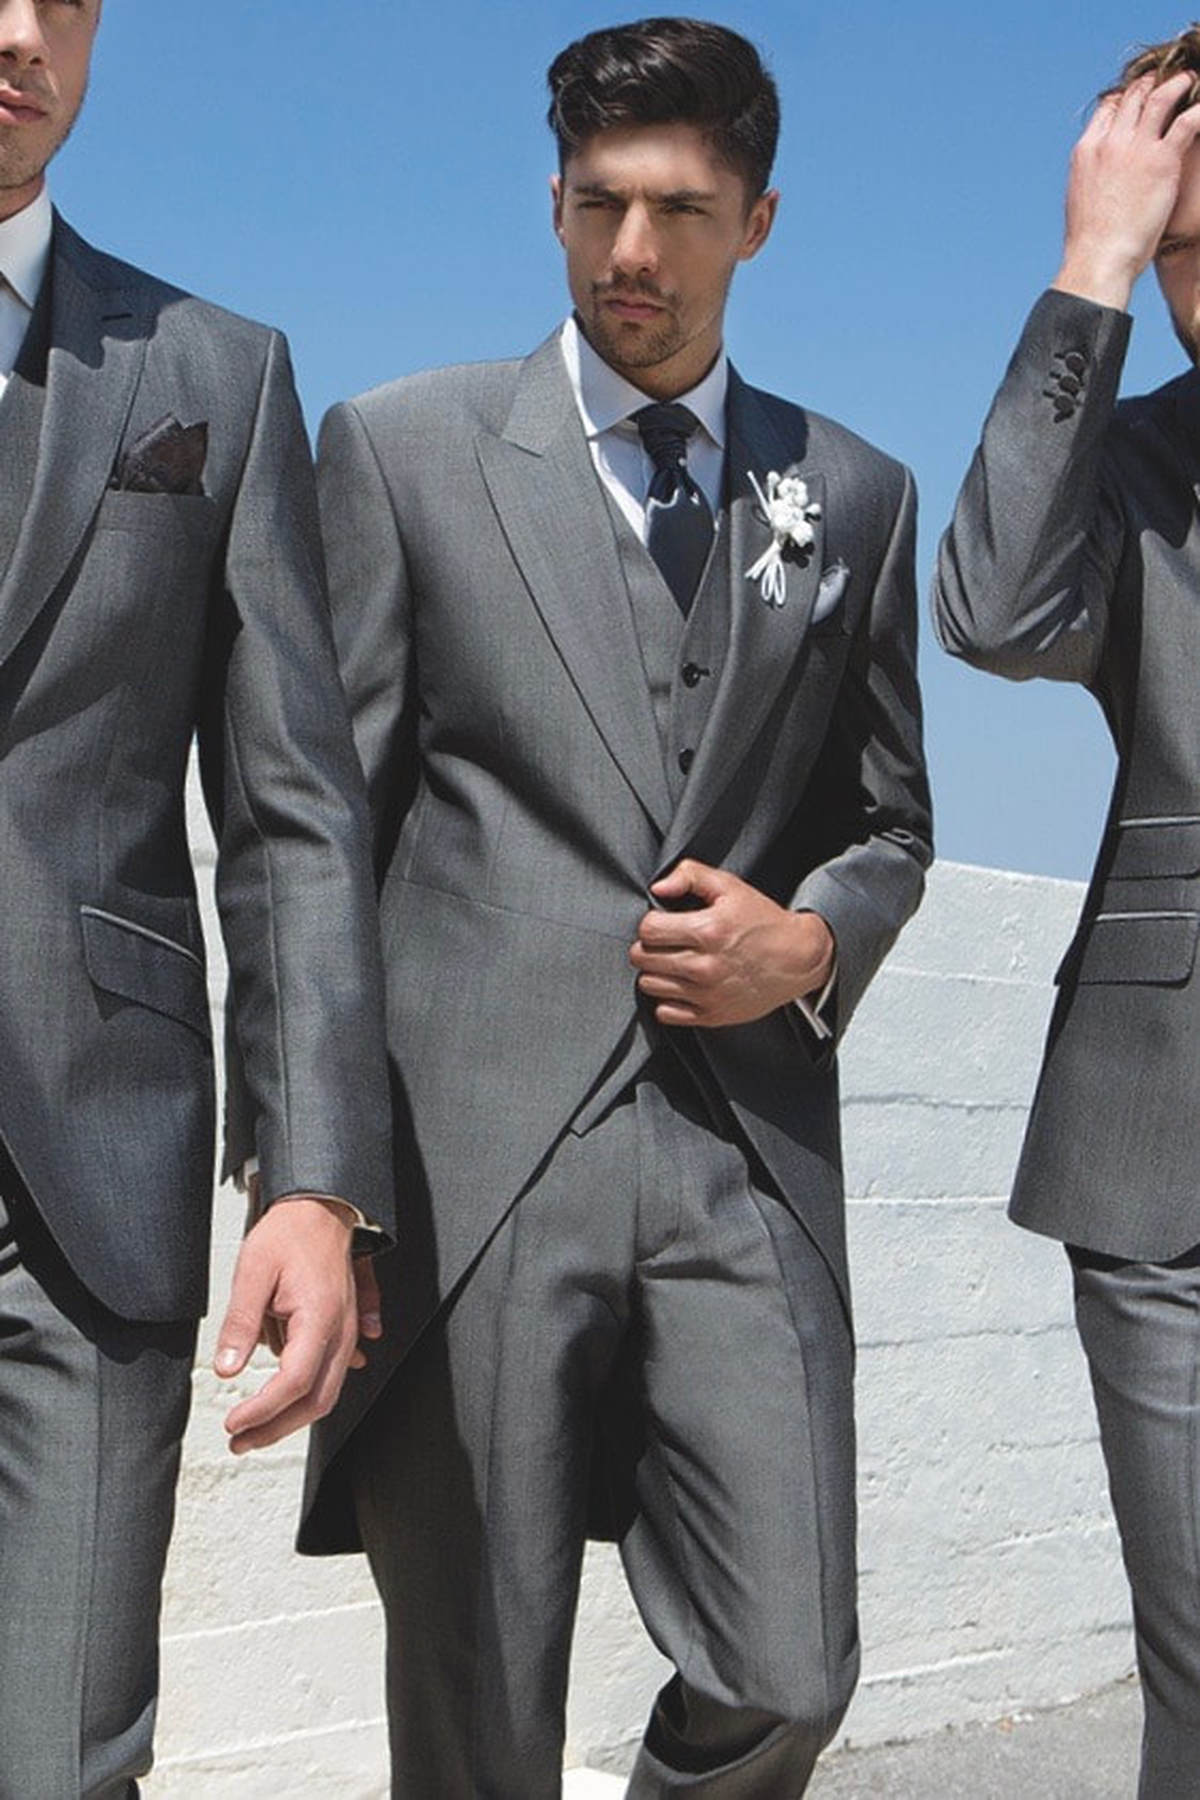 SILVER GREY TAILS OR SUIT HIRE - PARKERS FORMAL WEAR